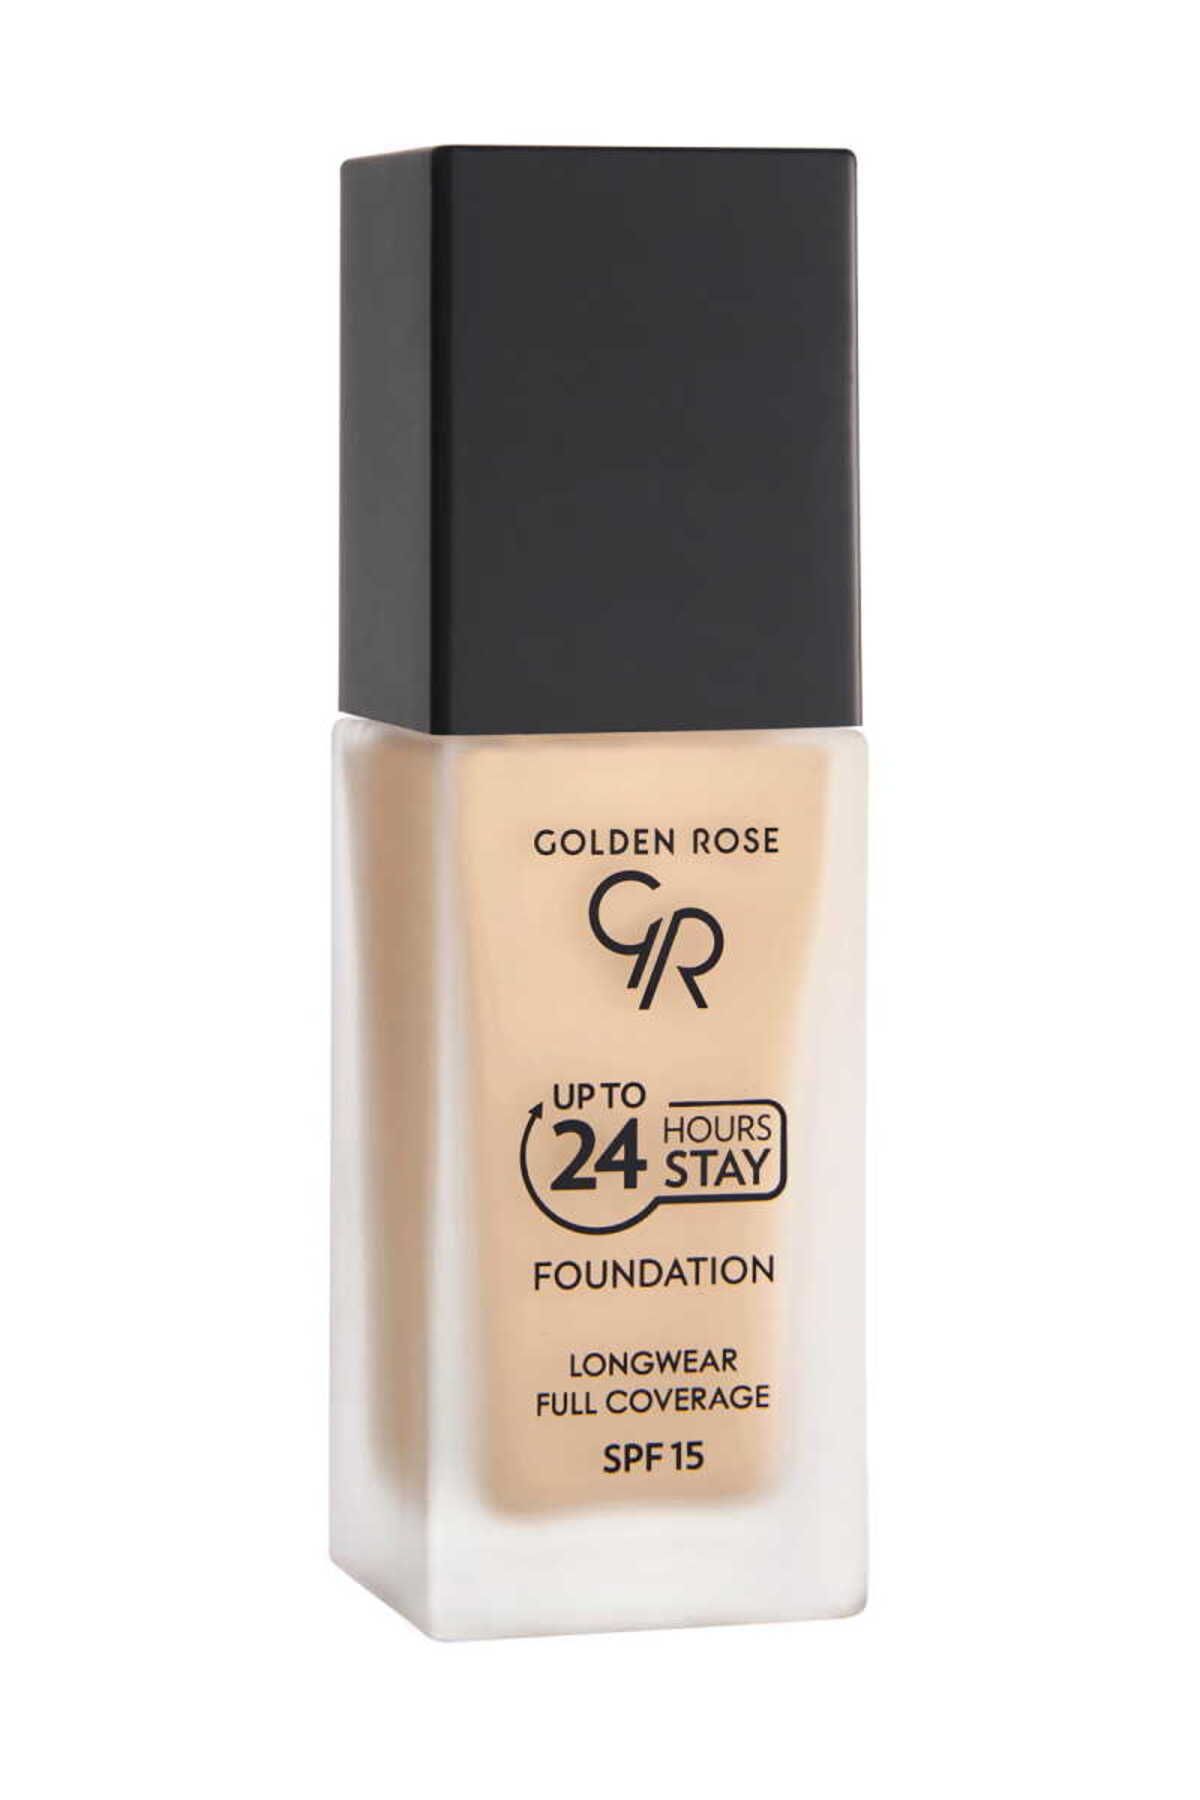 Golden Rose Up To 24 Hours Stay Foundation 15